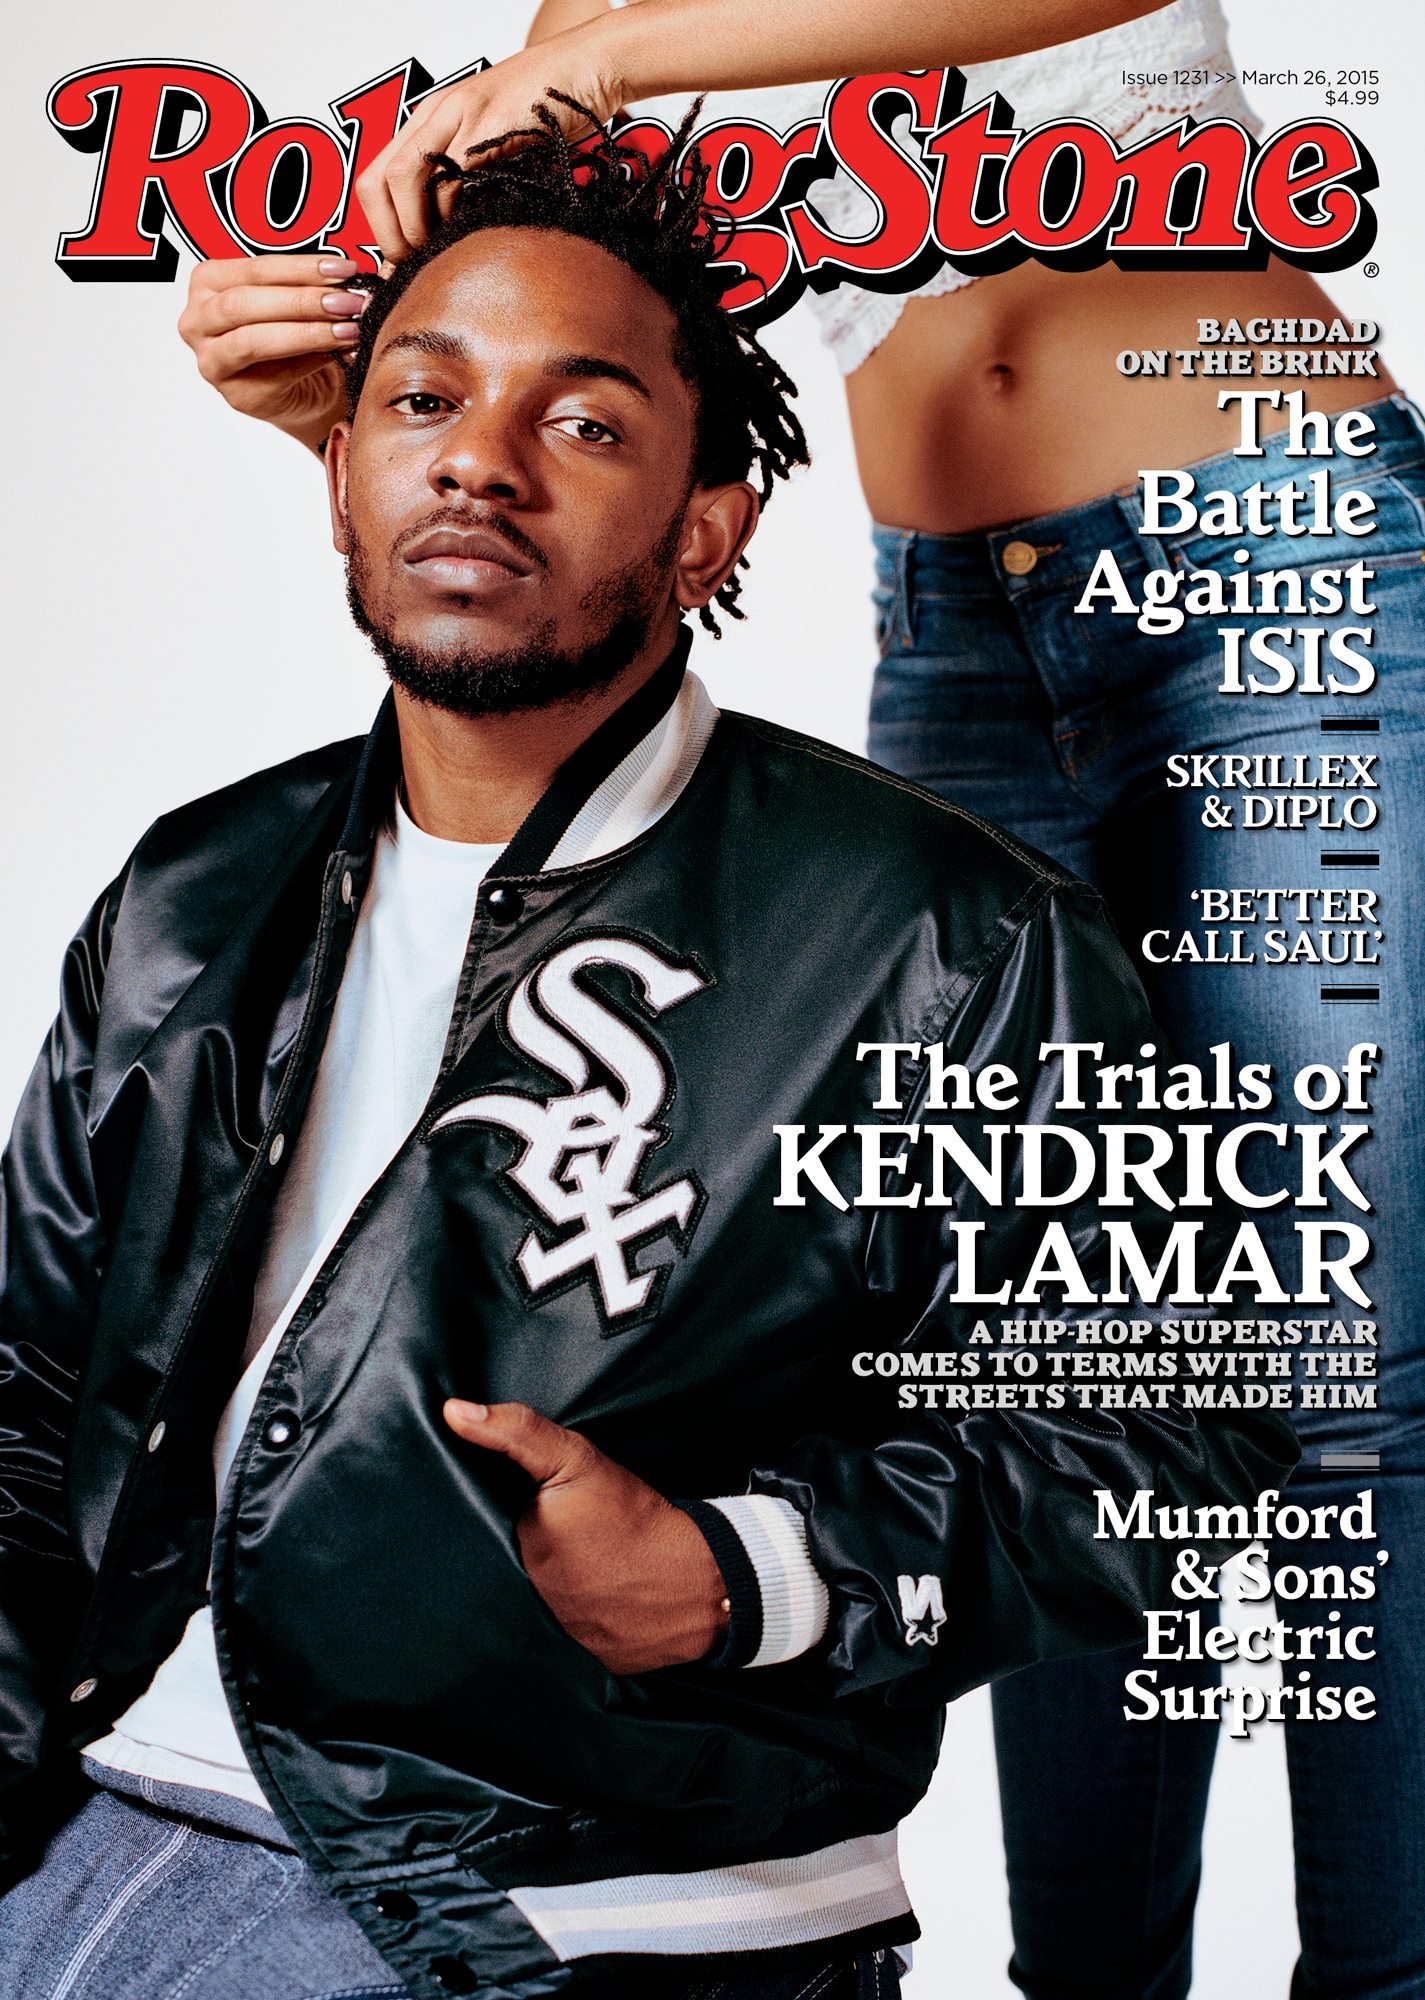 Most iconic Kendrick picture? | Page 4 | Kanye to The